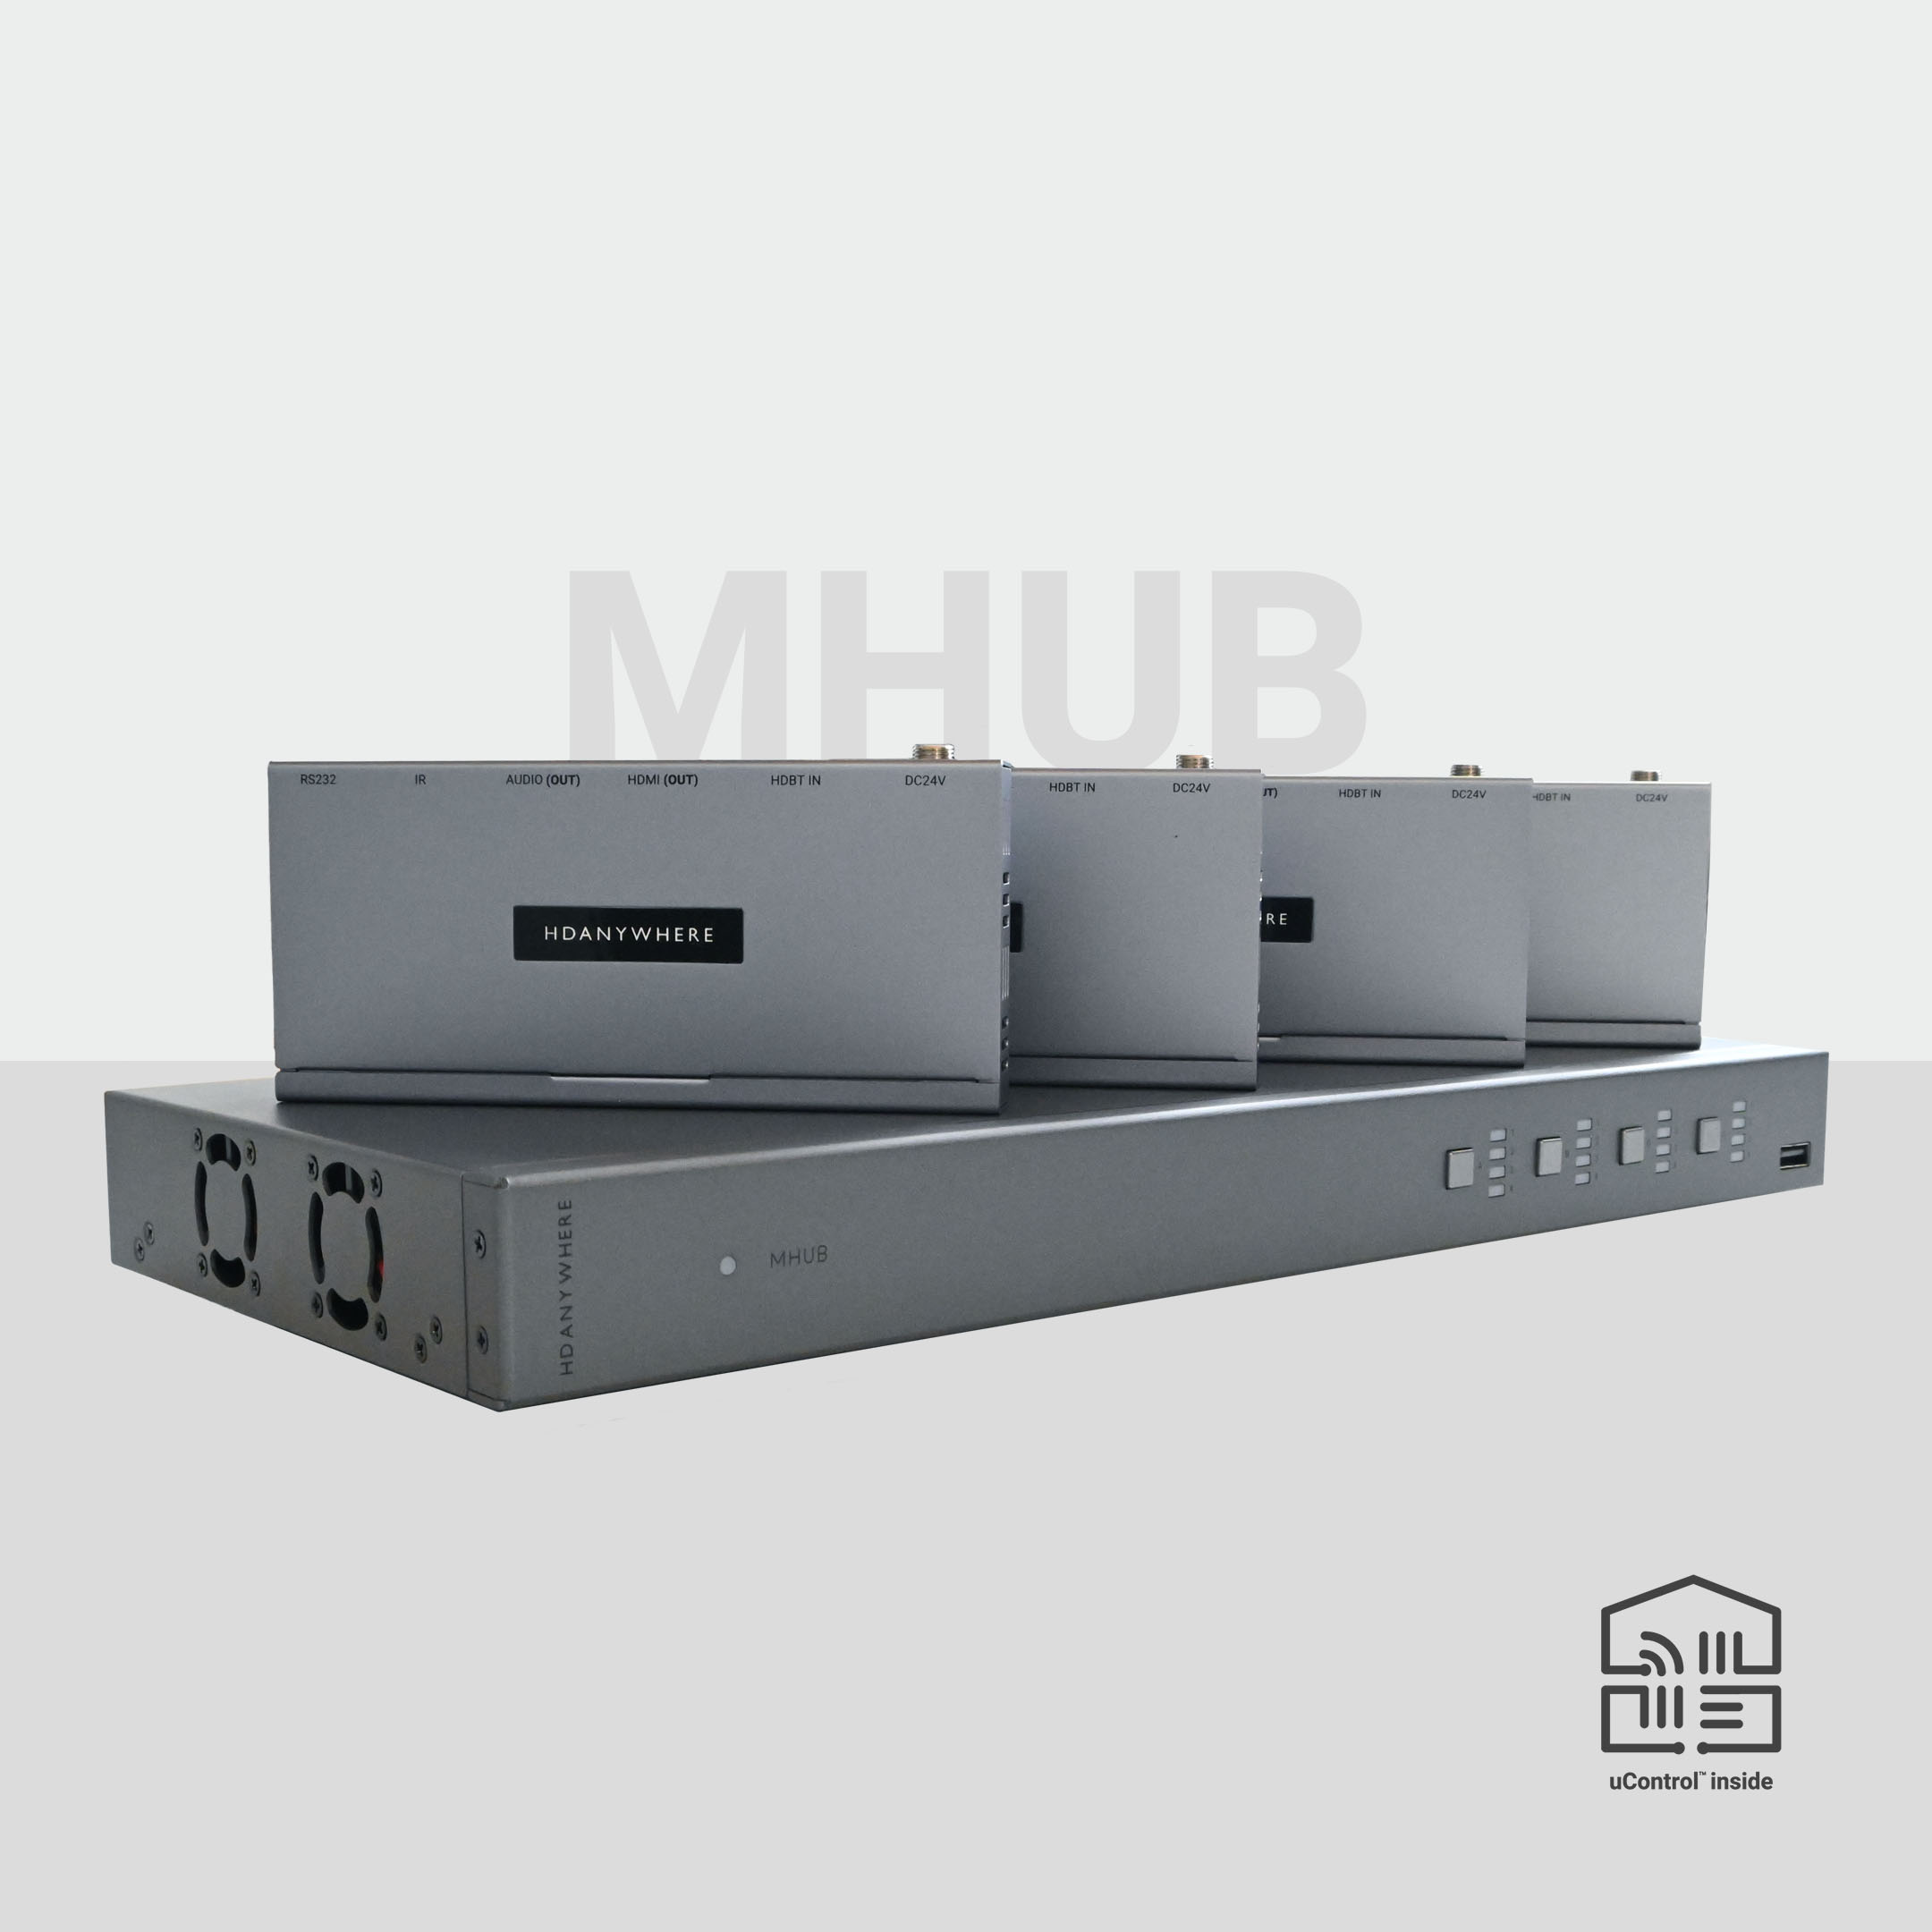 MHUB (4x4) 100A with its packaging